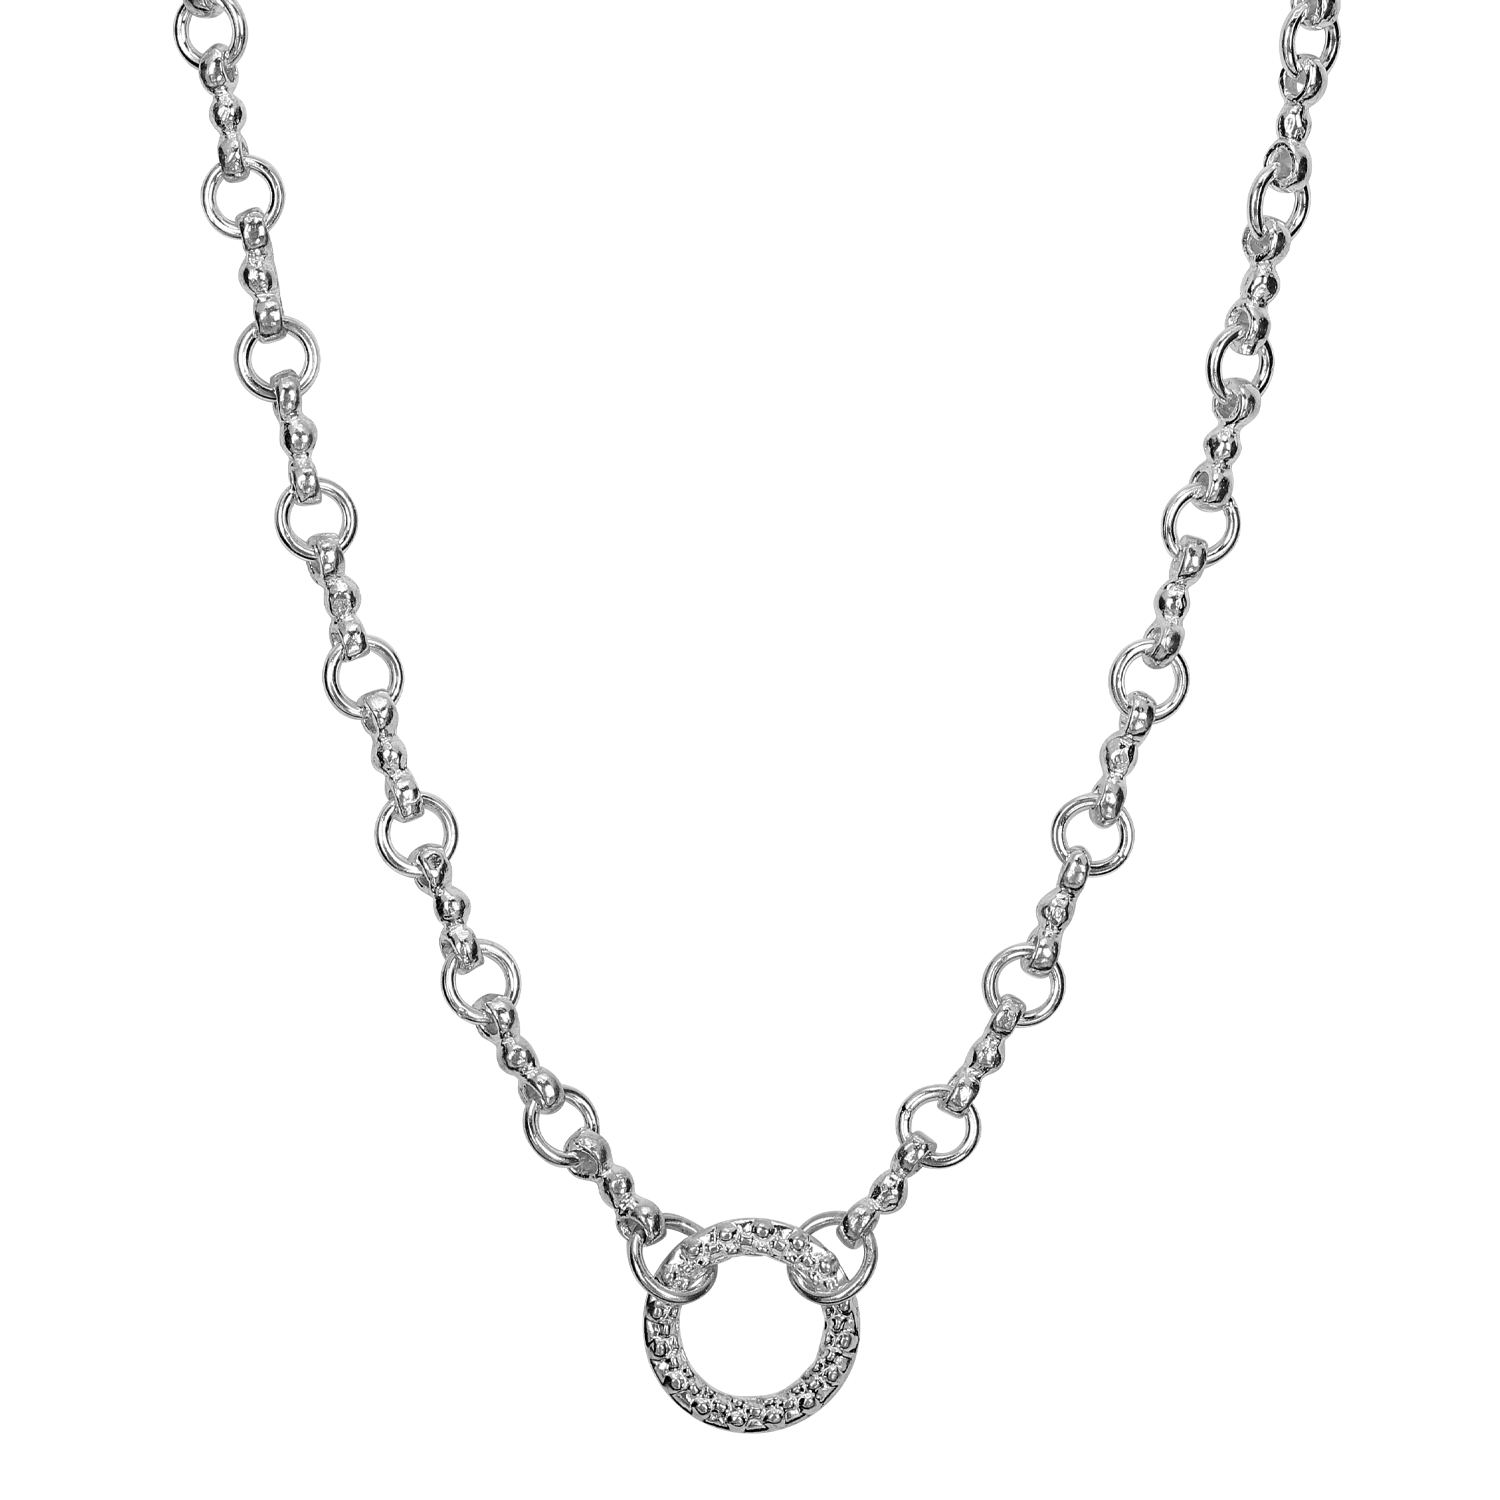 Vahan Sterling Silver Necklace Galloway and Moseley, Inc. Sumter, SC